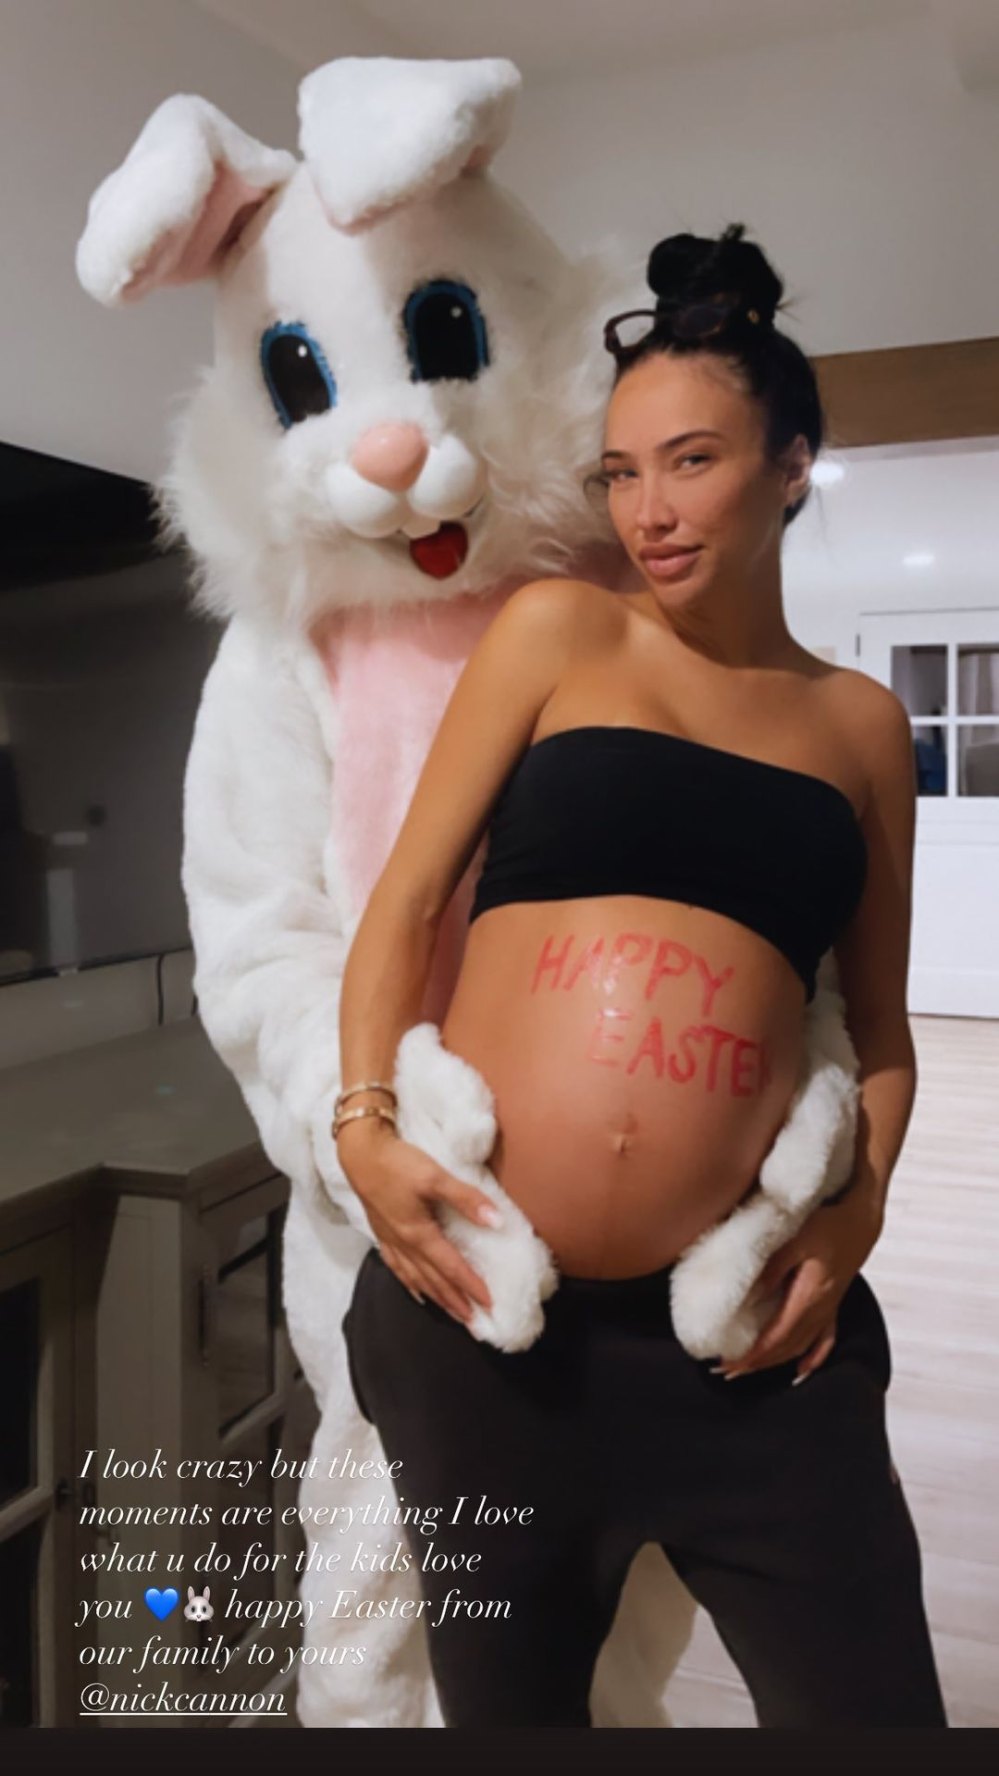 Pregnant Bre Tiesi Celebrates Easter With Nick Cannon: ‘Love You’